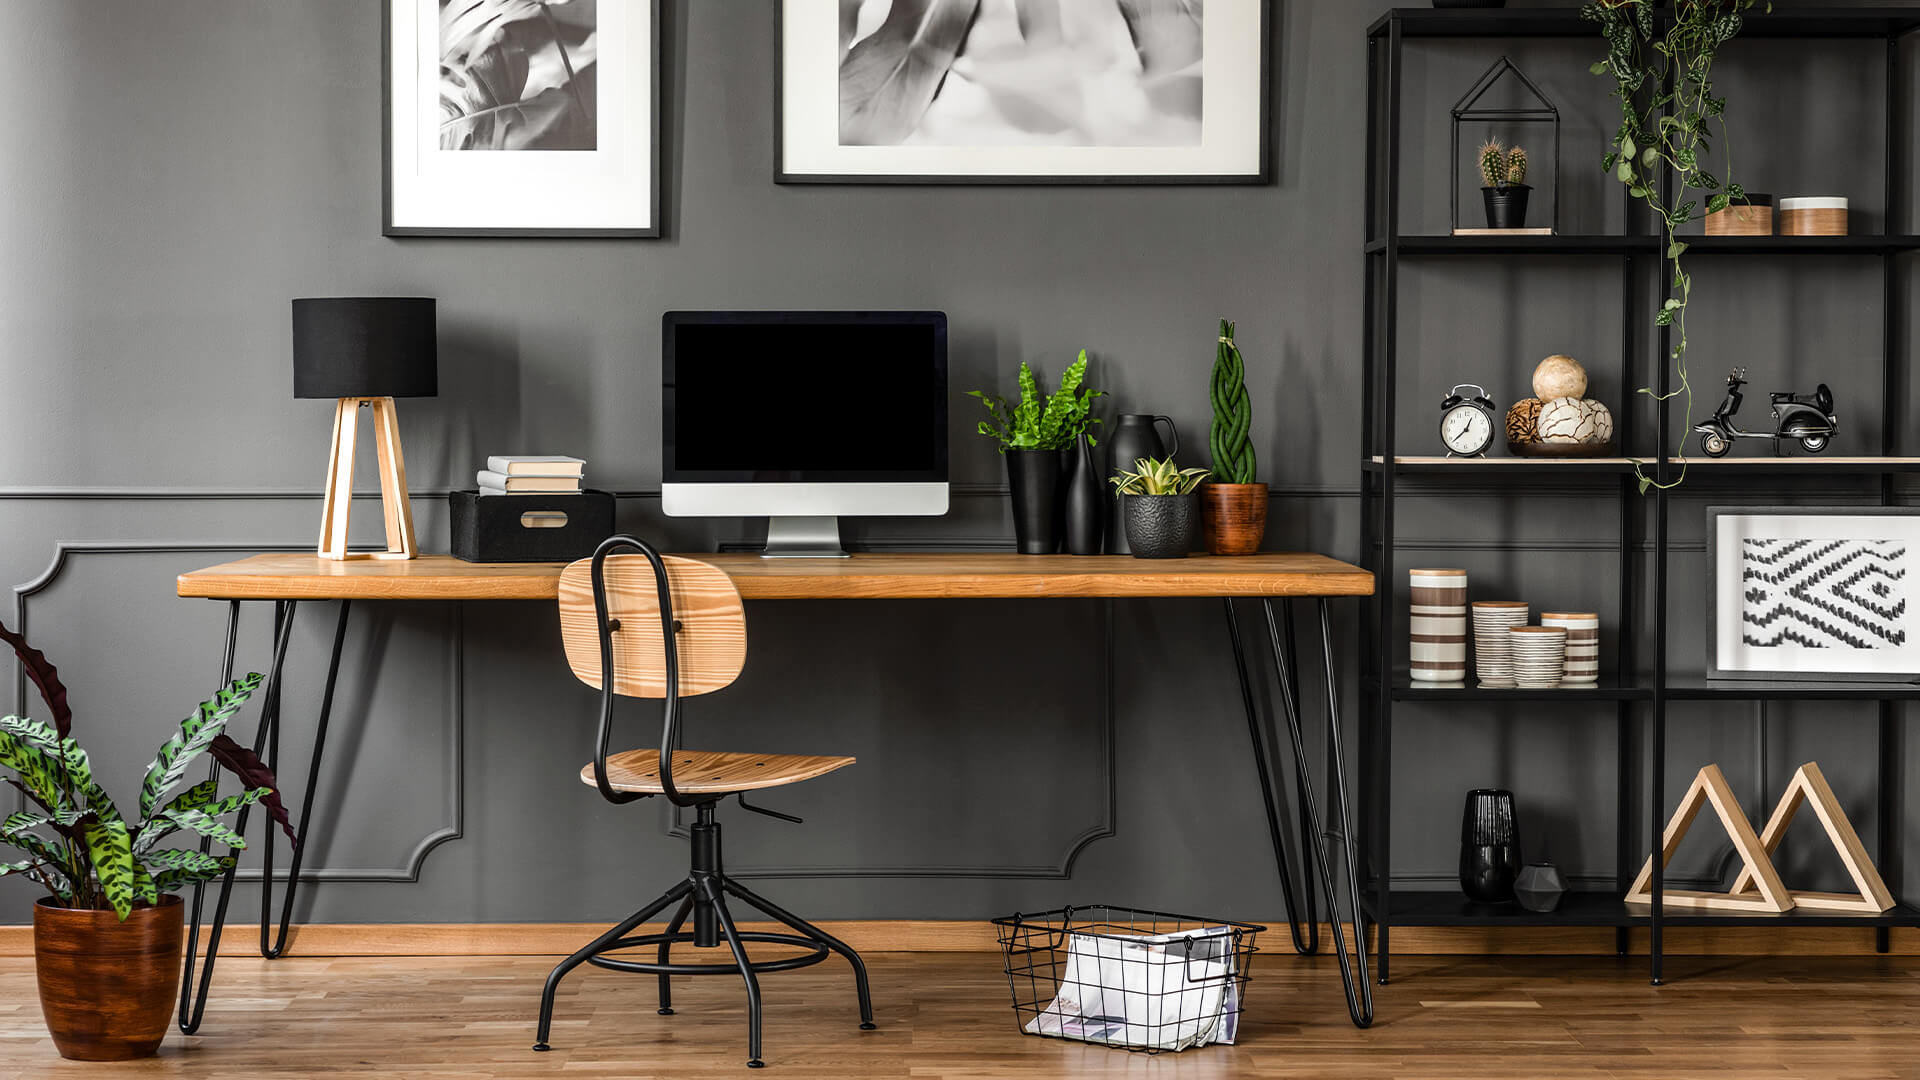 Home office interior. The space is modern with charcoal grey walls, and open iron shelving, and many plants